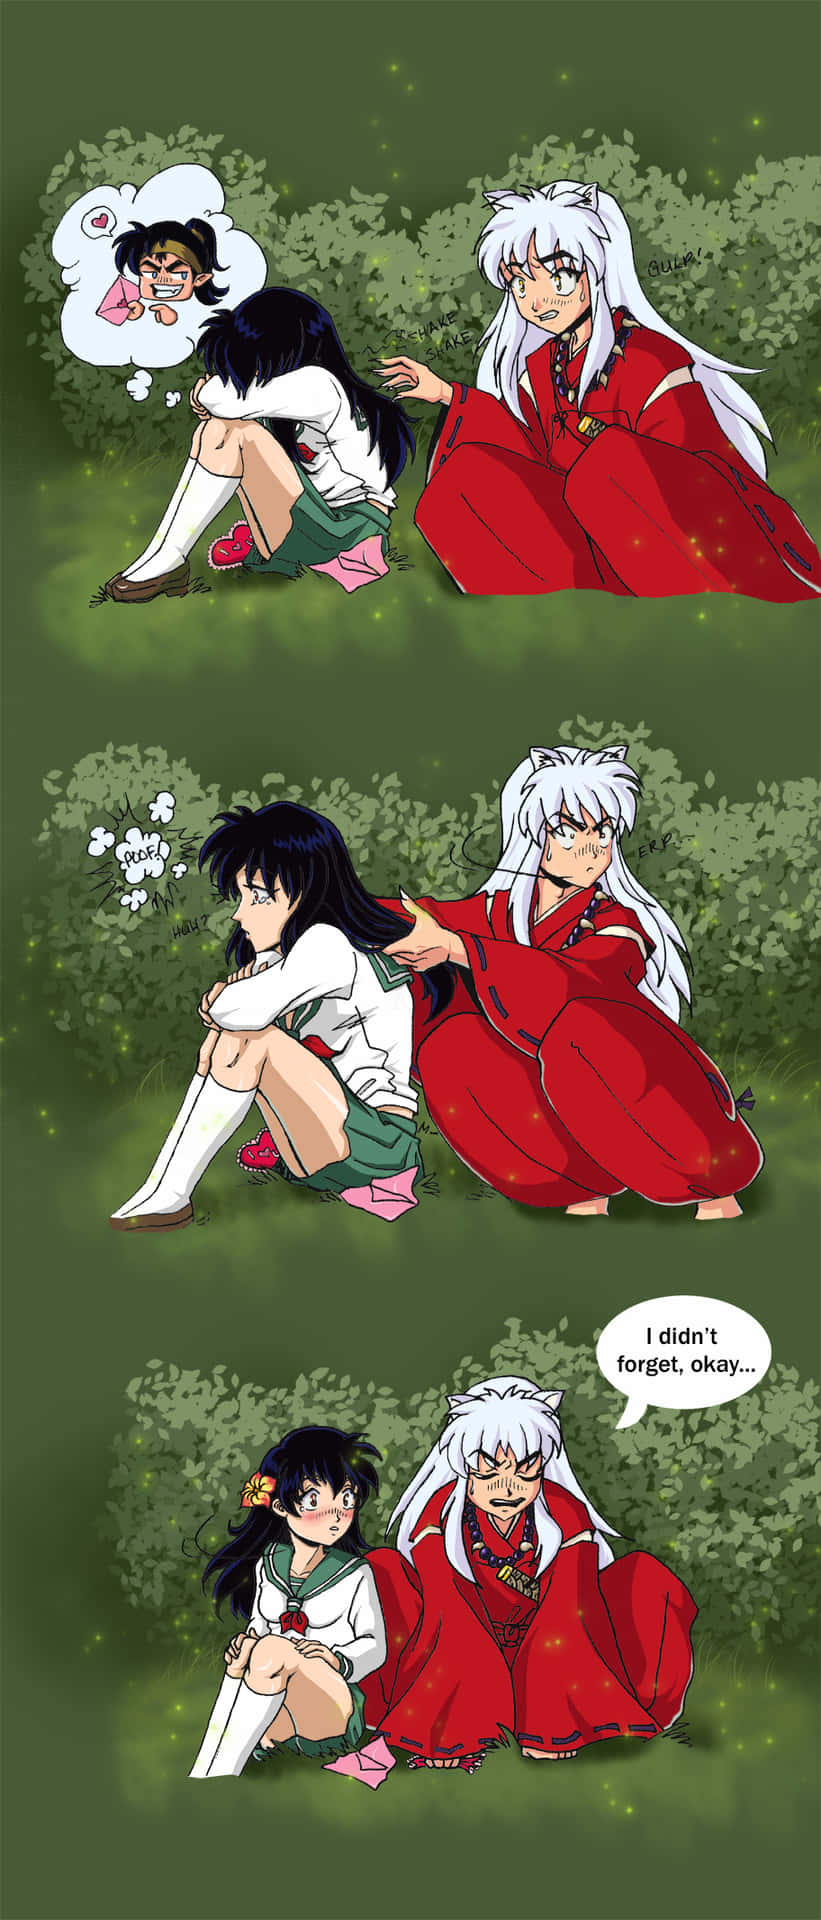 Inuyasha and Kagome sharing a tender moment together in a serene landscape. Wallpaper